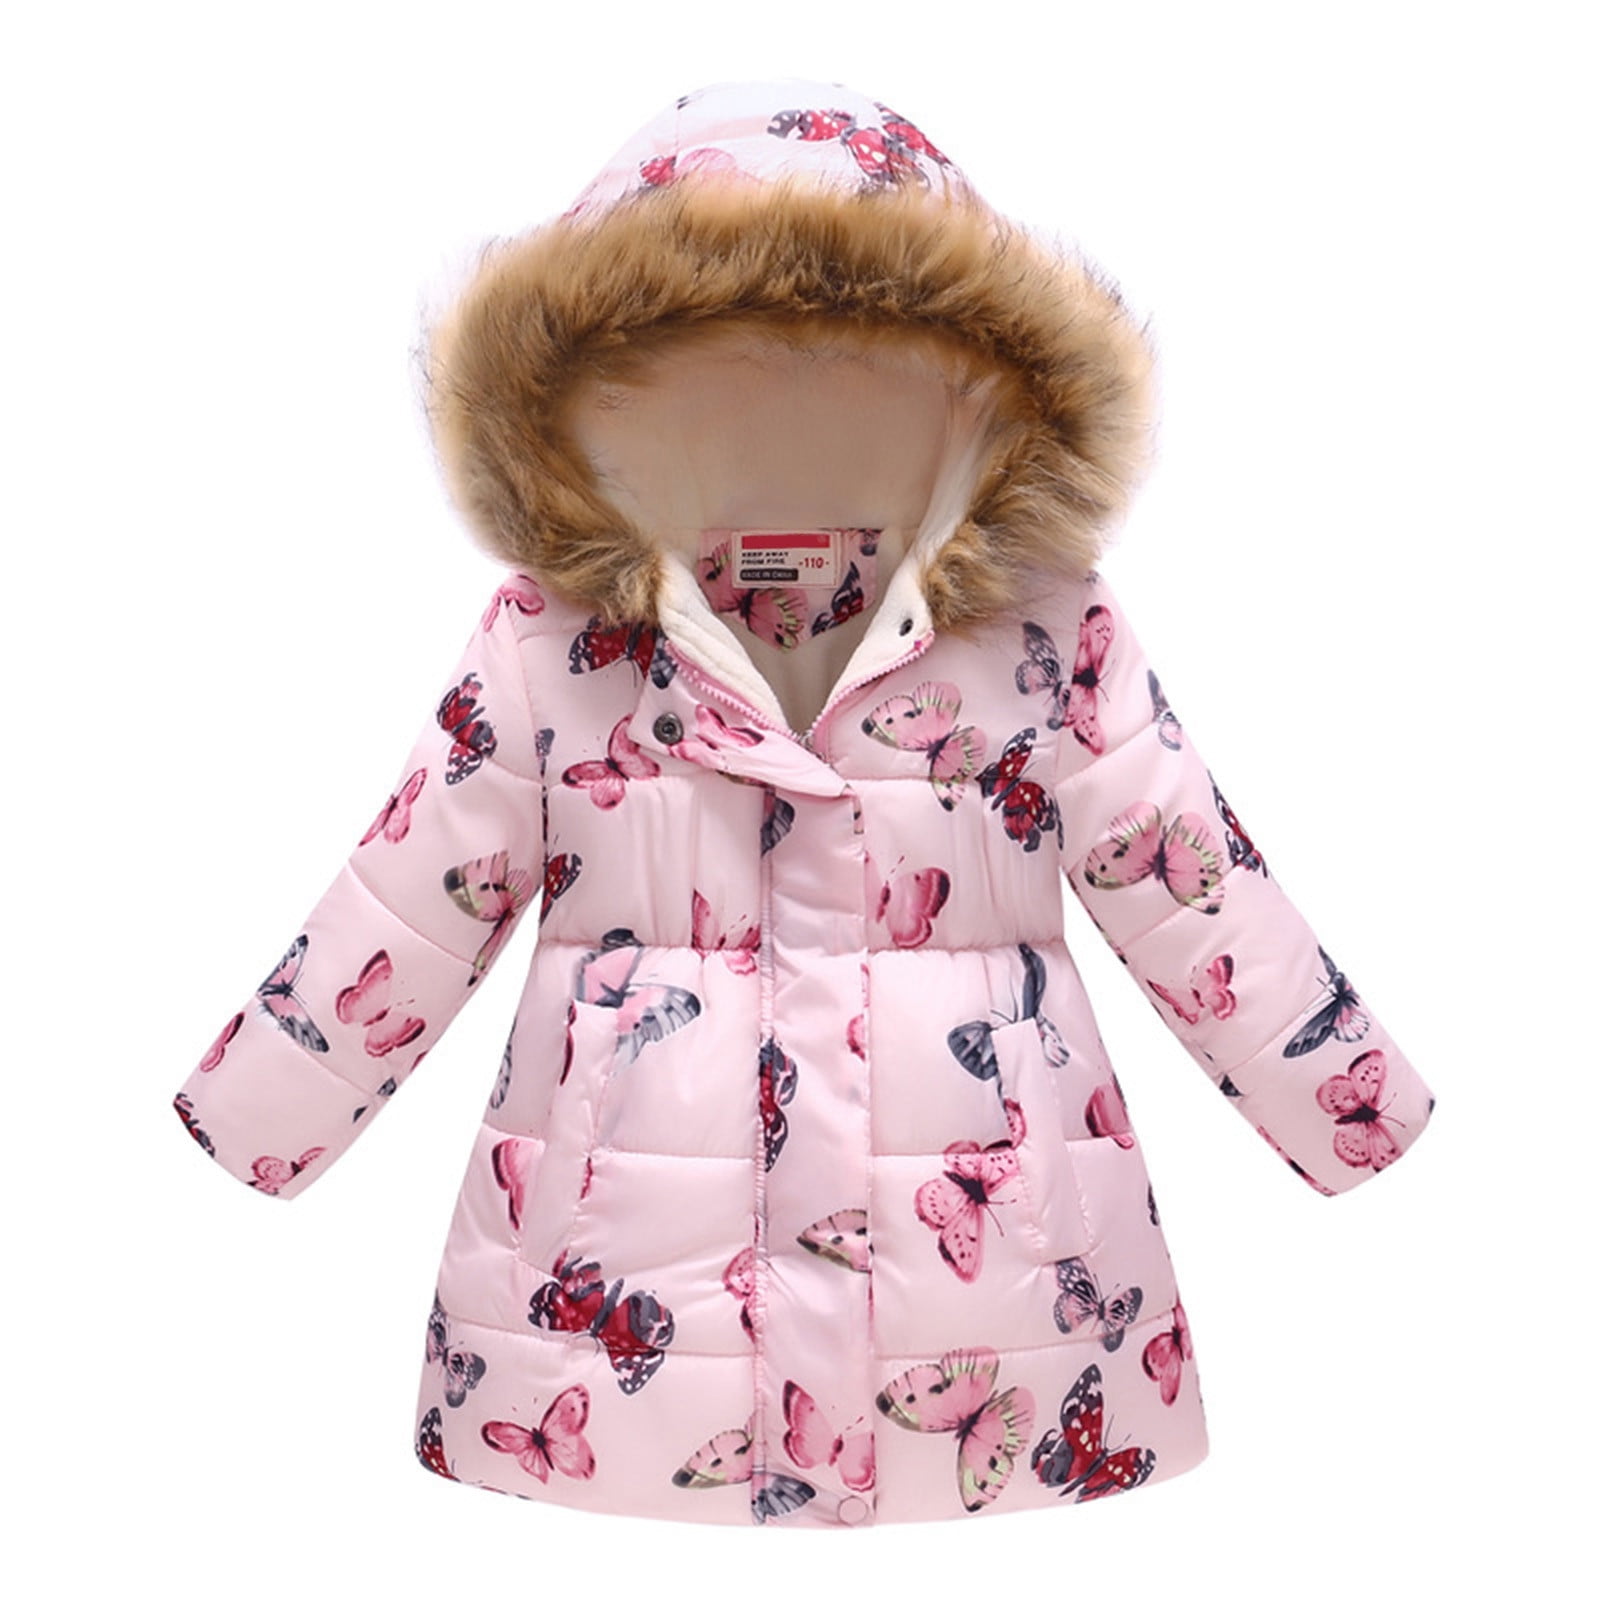  rrhss Baby Girls Button Formal Coat Toddler Kids Hooded Woolen  Jacket Fall Winter Outwear Pink Size(5-6 Years): Clothing, Shoes & Jewelry